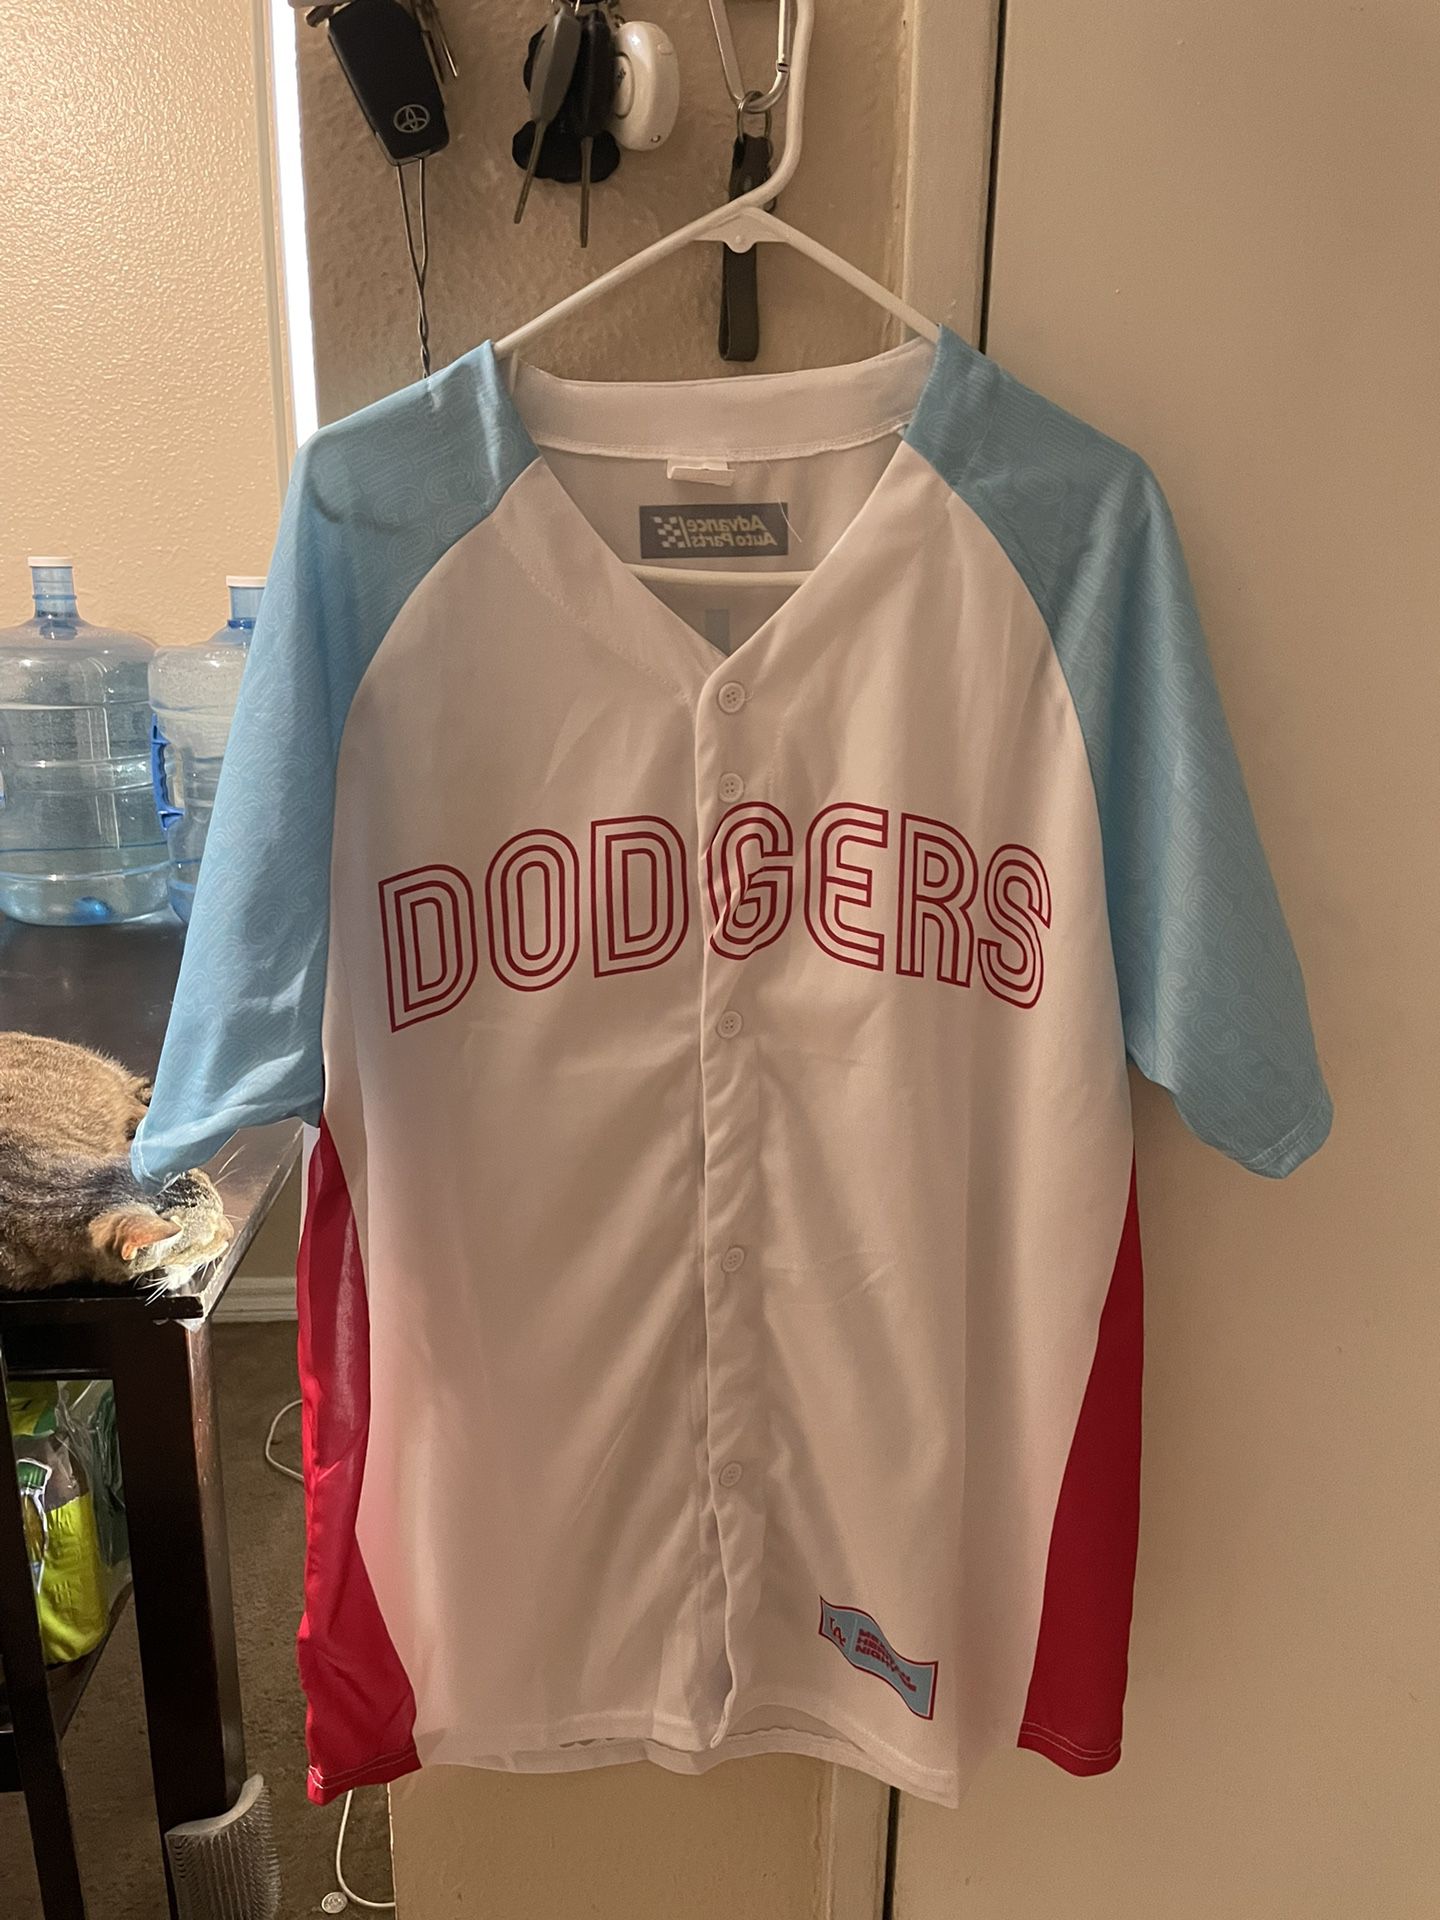 Dodgers jersey mexican heritage night for Sale in Grand Terrace, CA -  OfferUp